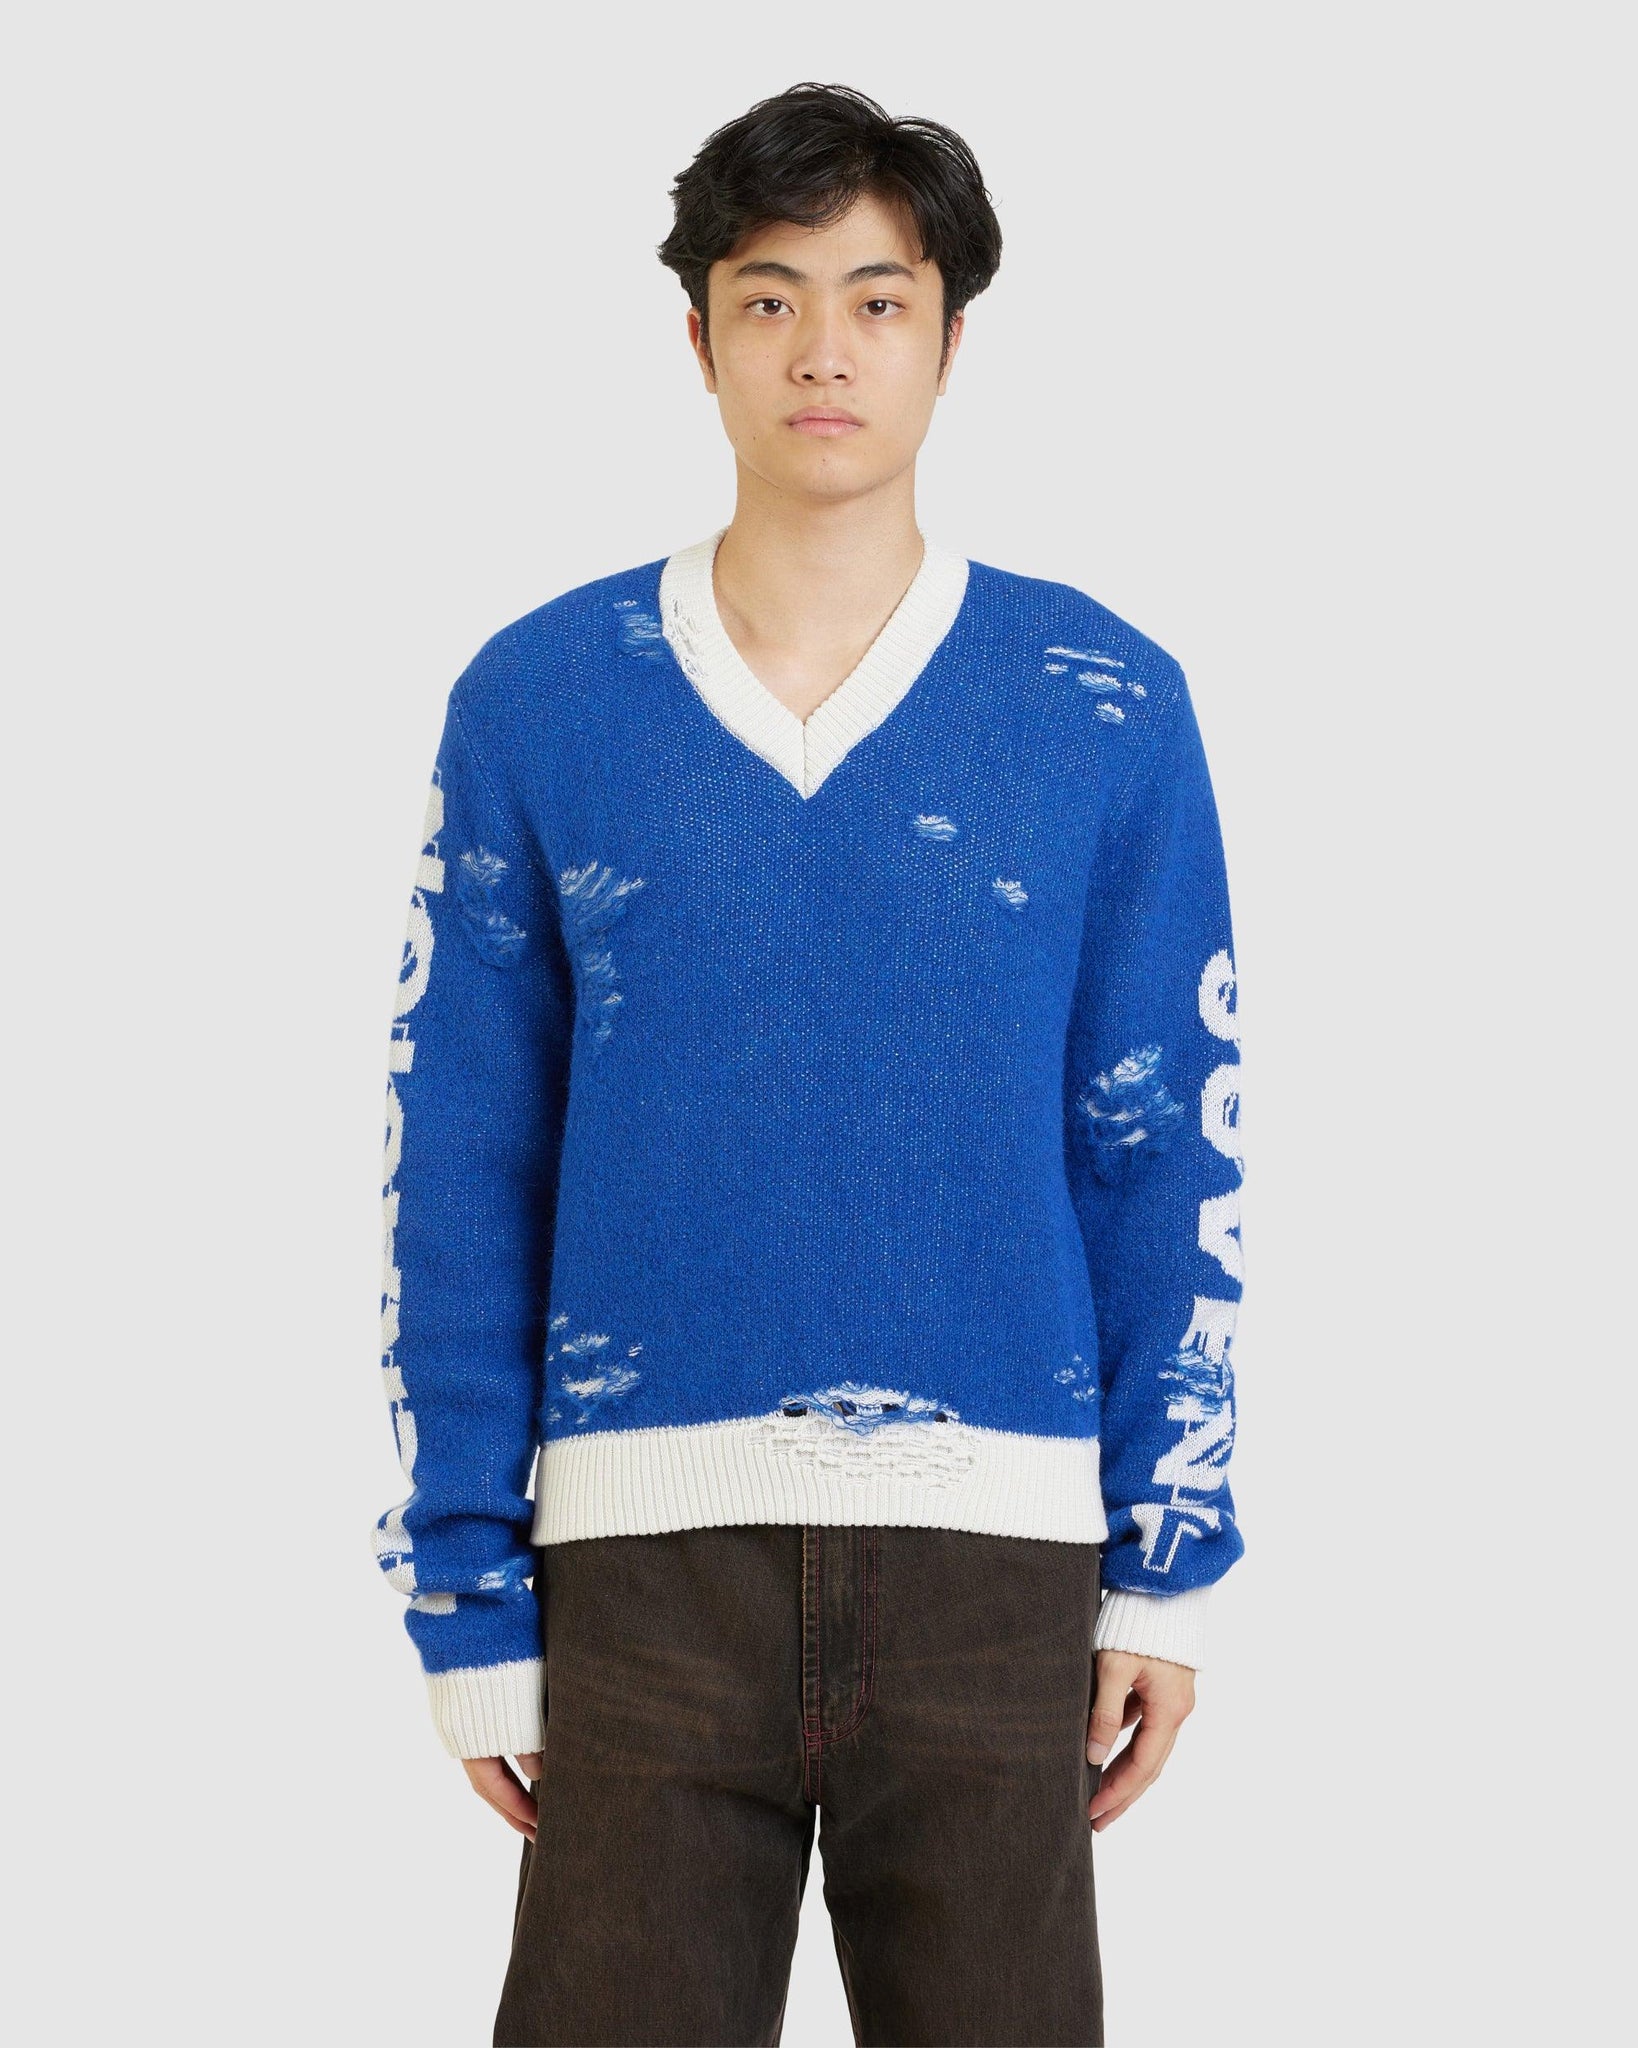 Knit Distressed Sweater - {{ collection.title }} - Chinatown Country Club 